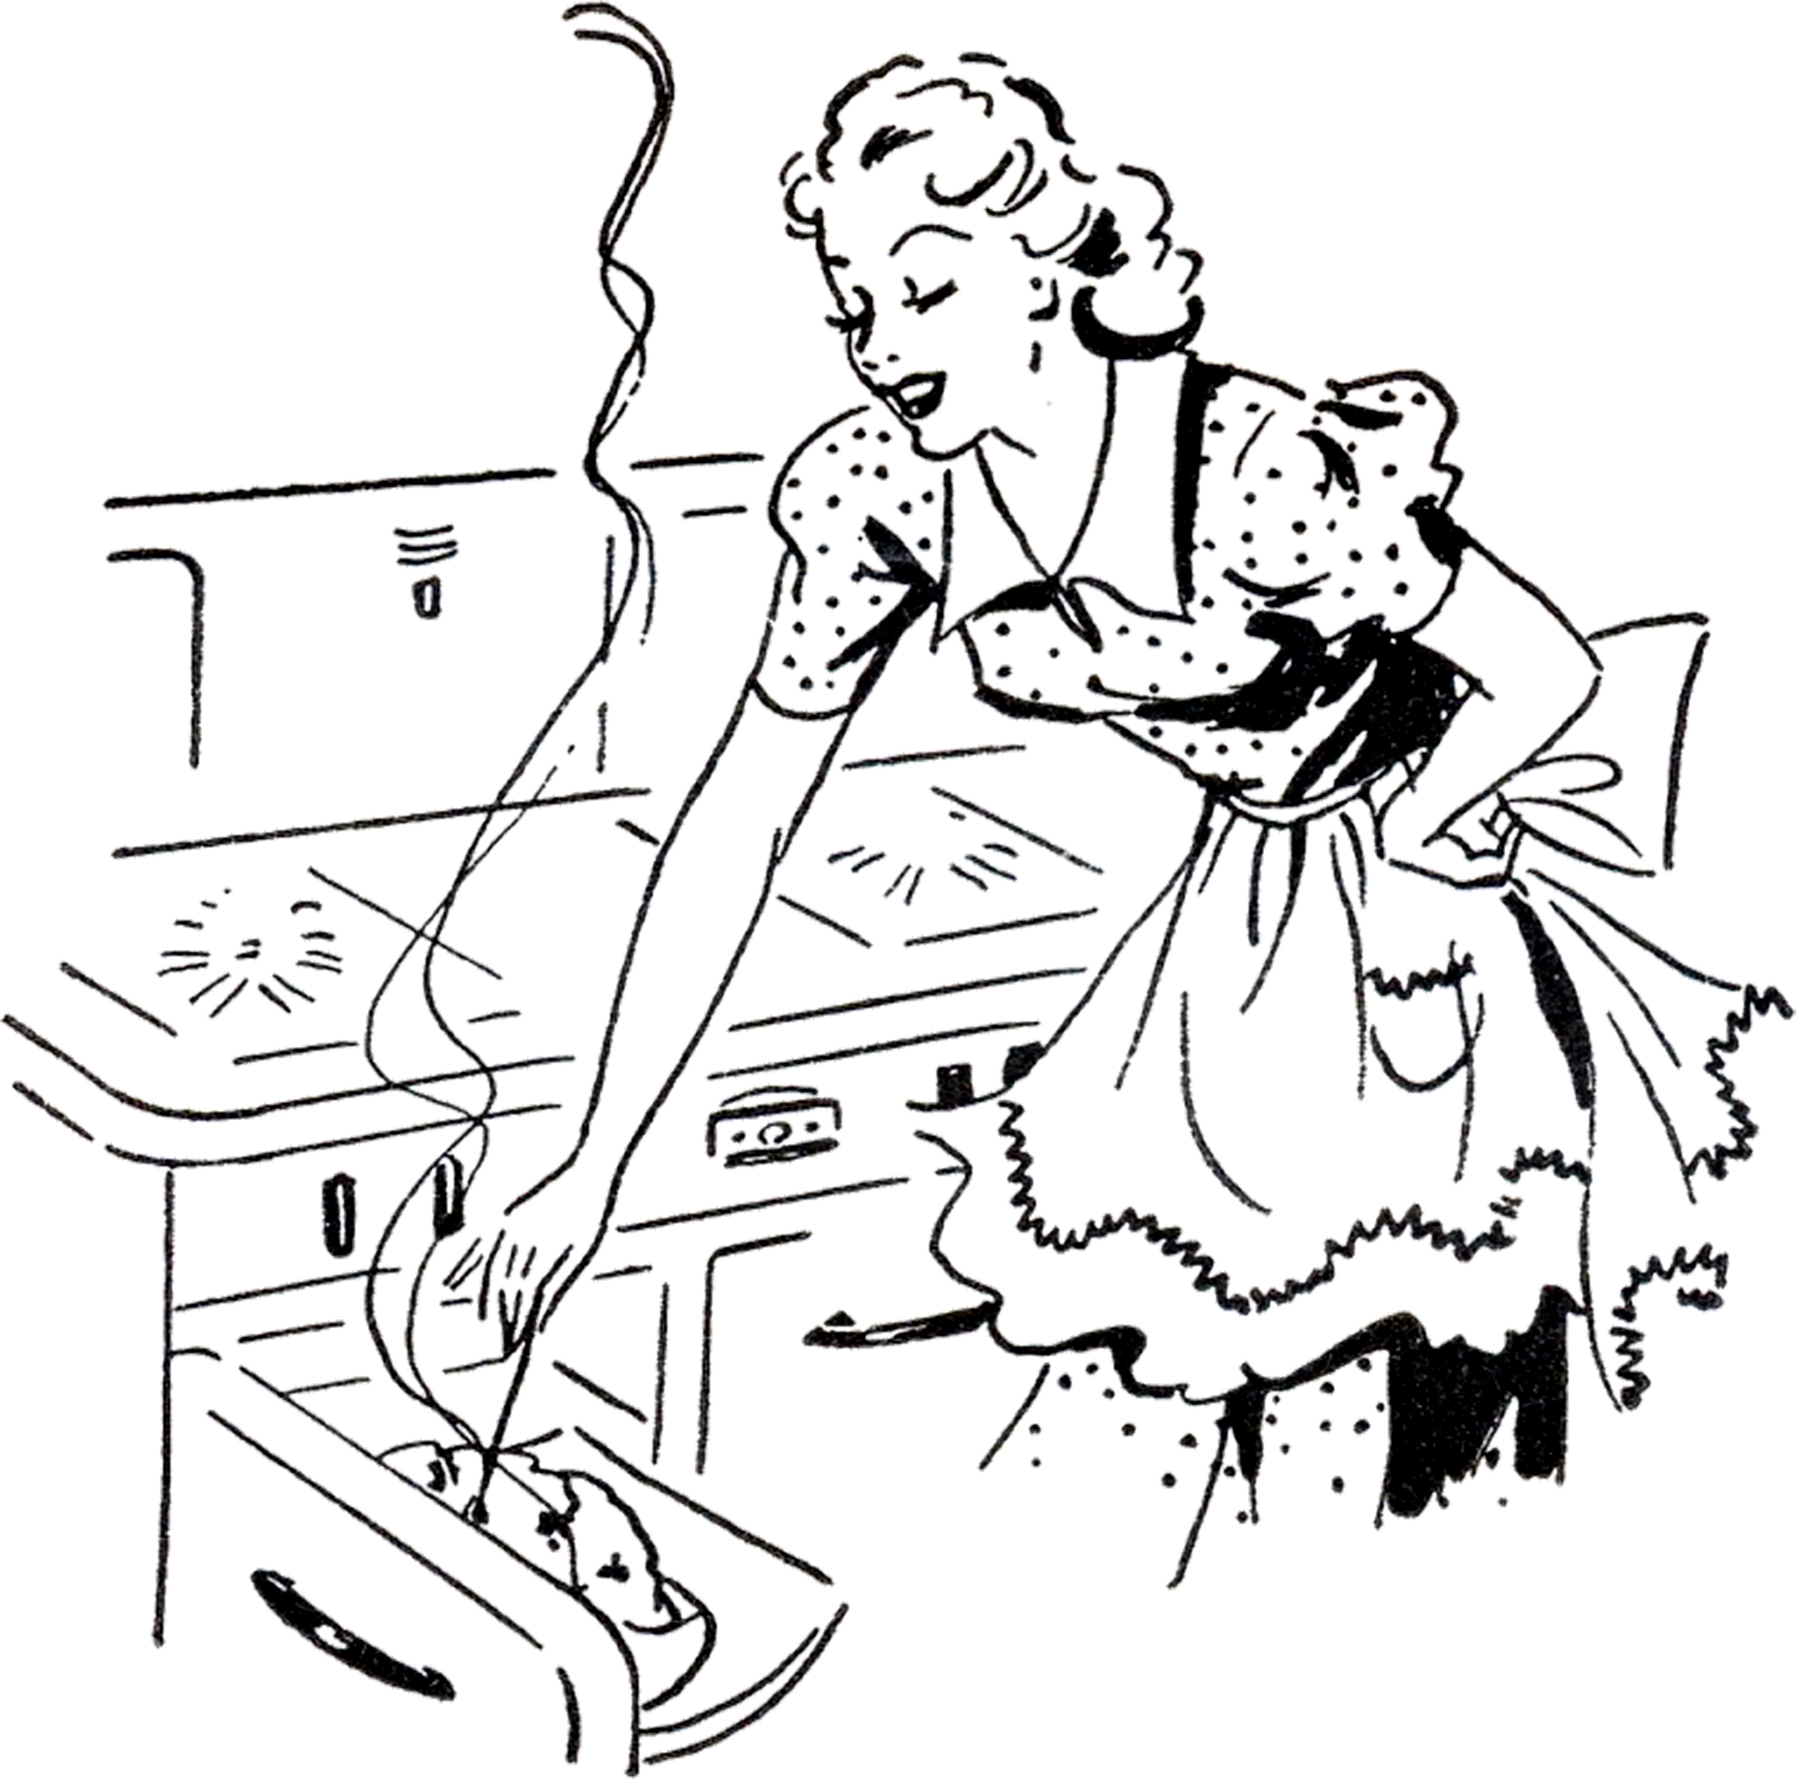 httpsadorable retro cooking mom image